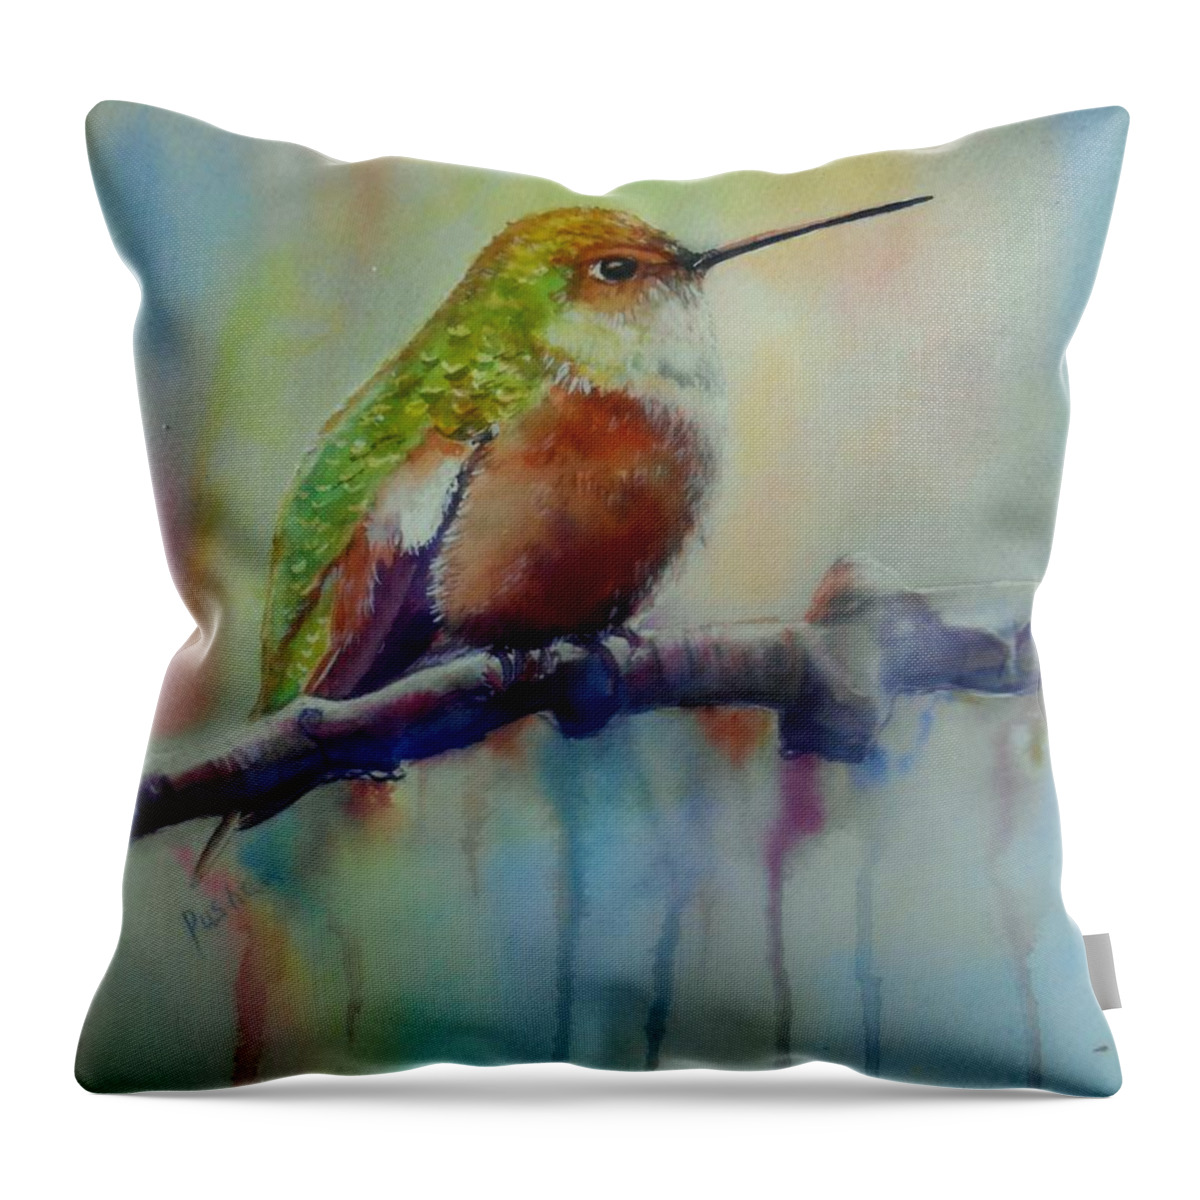 Female Rufous Hummingbird Throw Pillow featuring the painting Lady by Patricia Pushaw